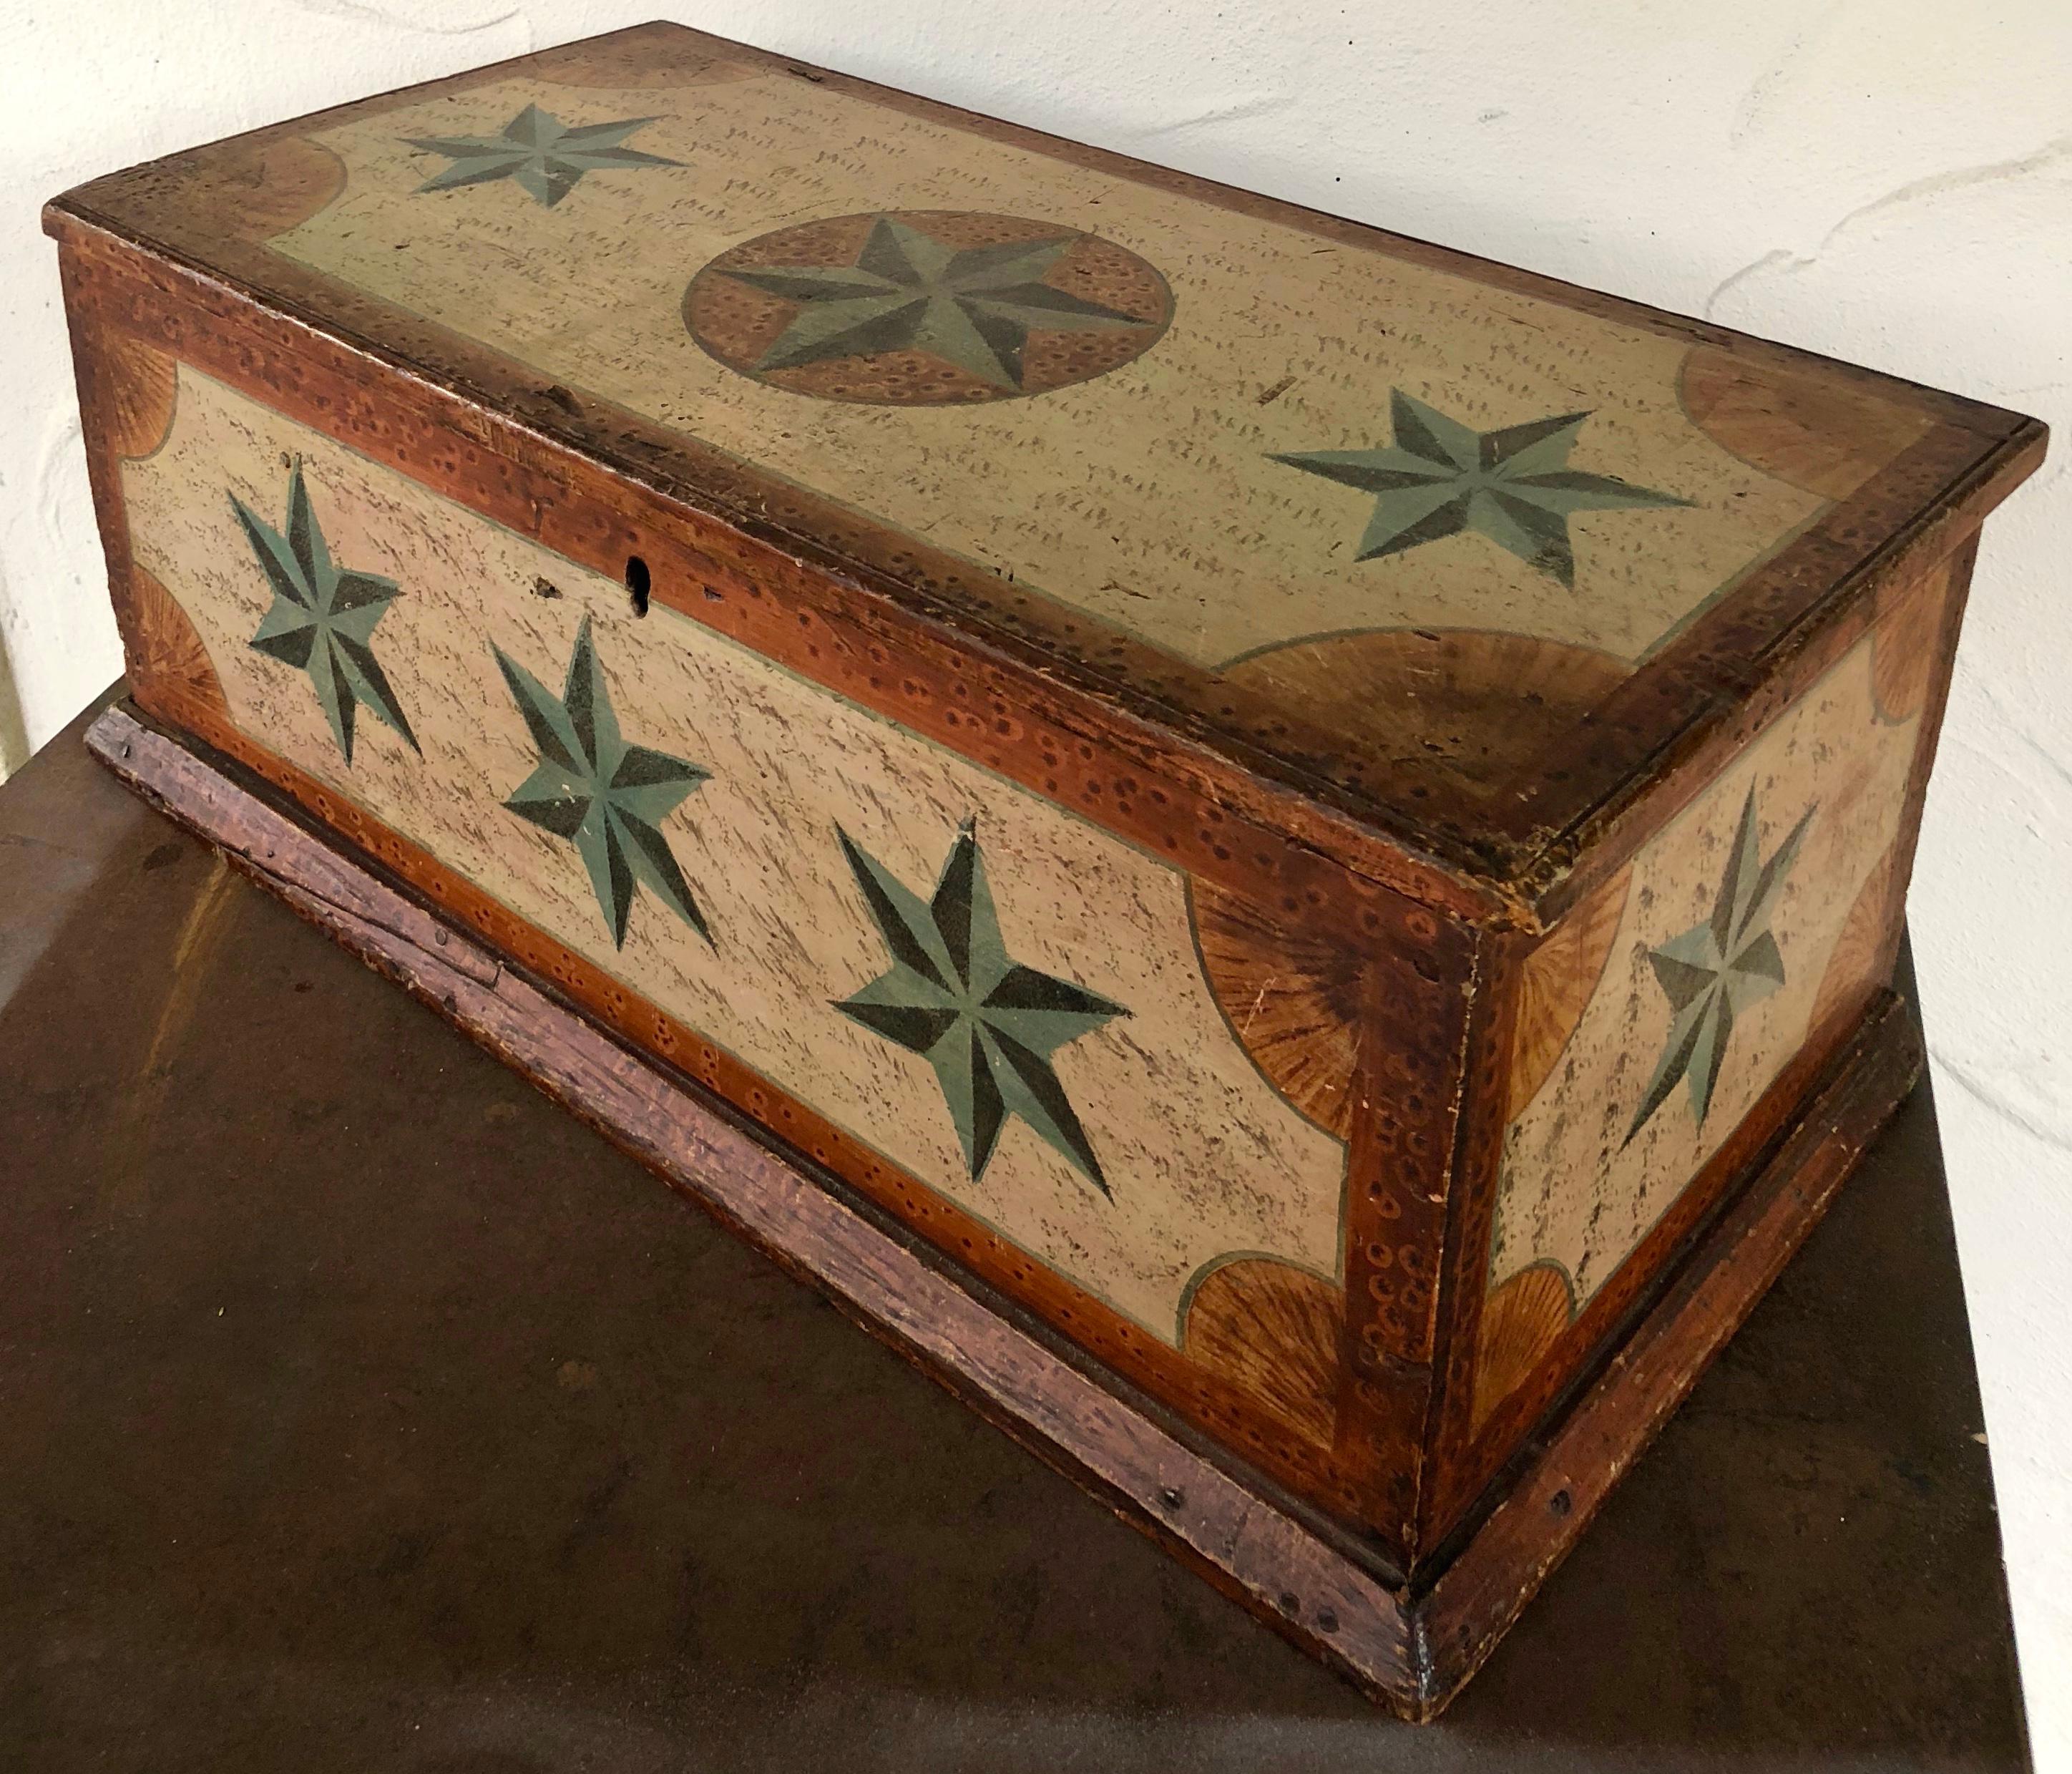 Great Folk Art paint decoration in the form of multiple compass stars. Appears to be constructed of pine, cotter pin hinges, some rose head and some square nails. It is partially lined with some 18th century newspaper. The paint decoration is early